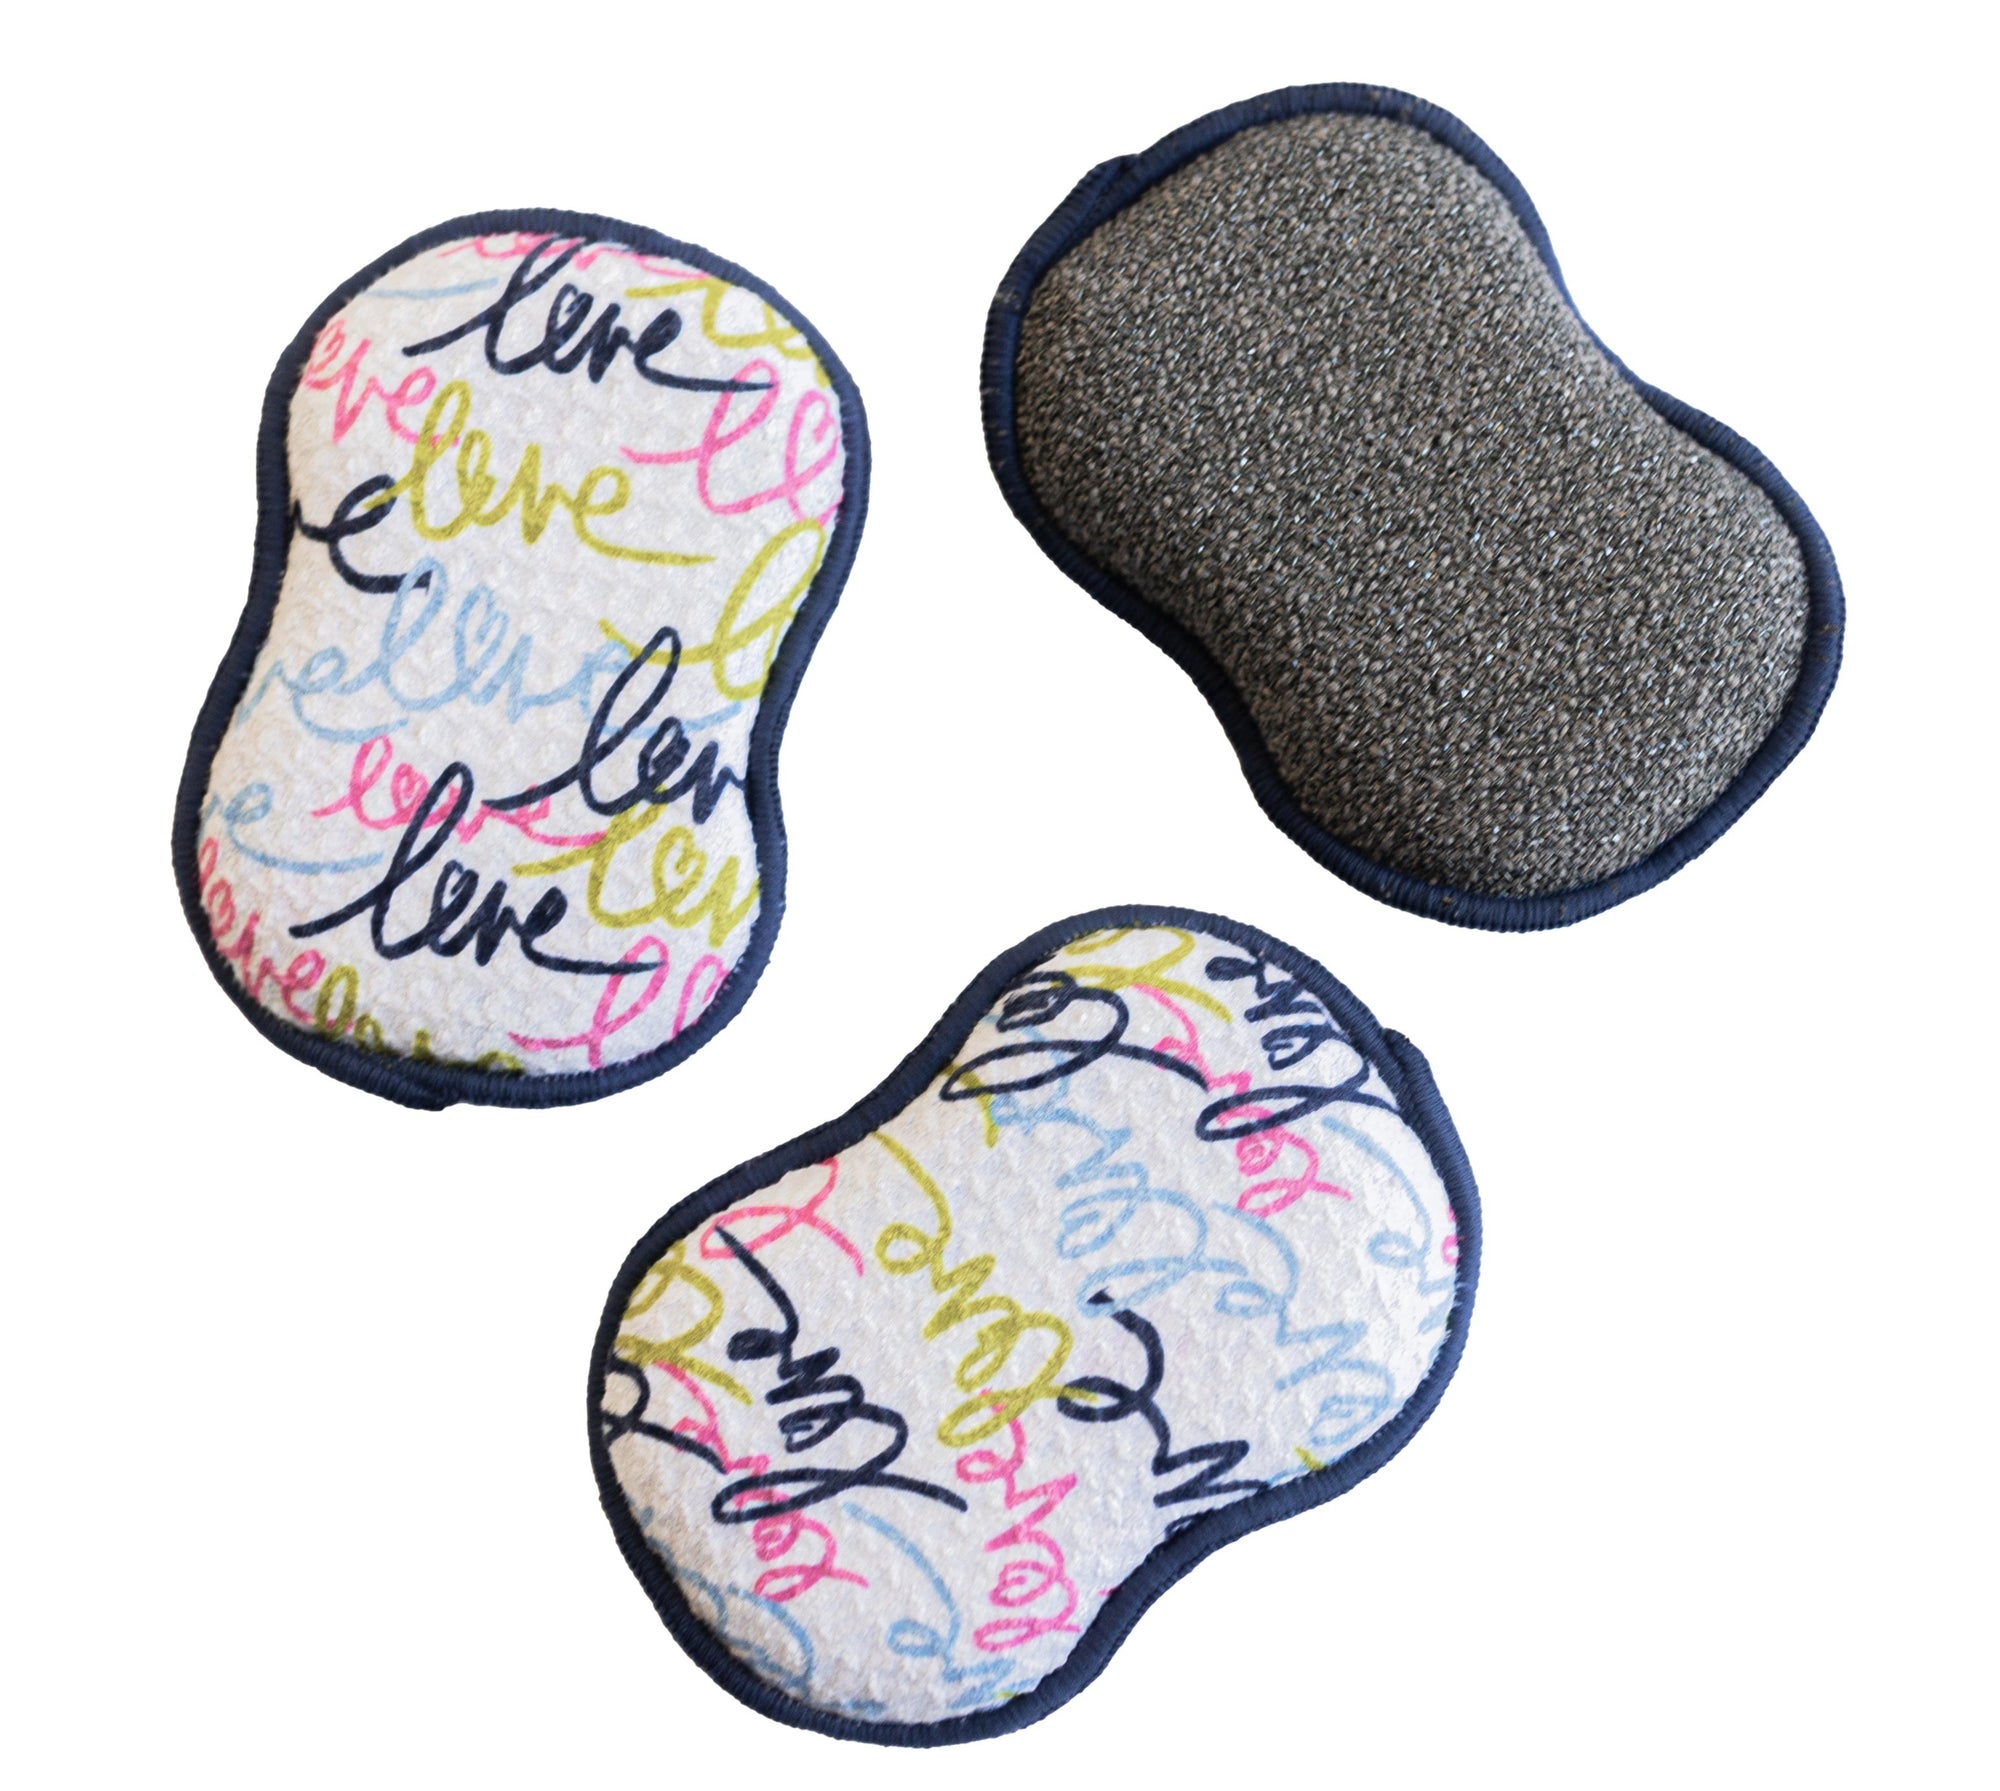 RE:usable Sponges (Set of 3) - HGC Love Sponges & Scouring Pads Once Again Home Co.   